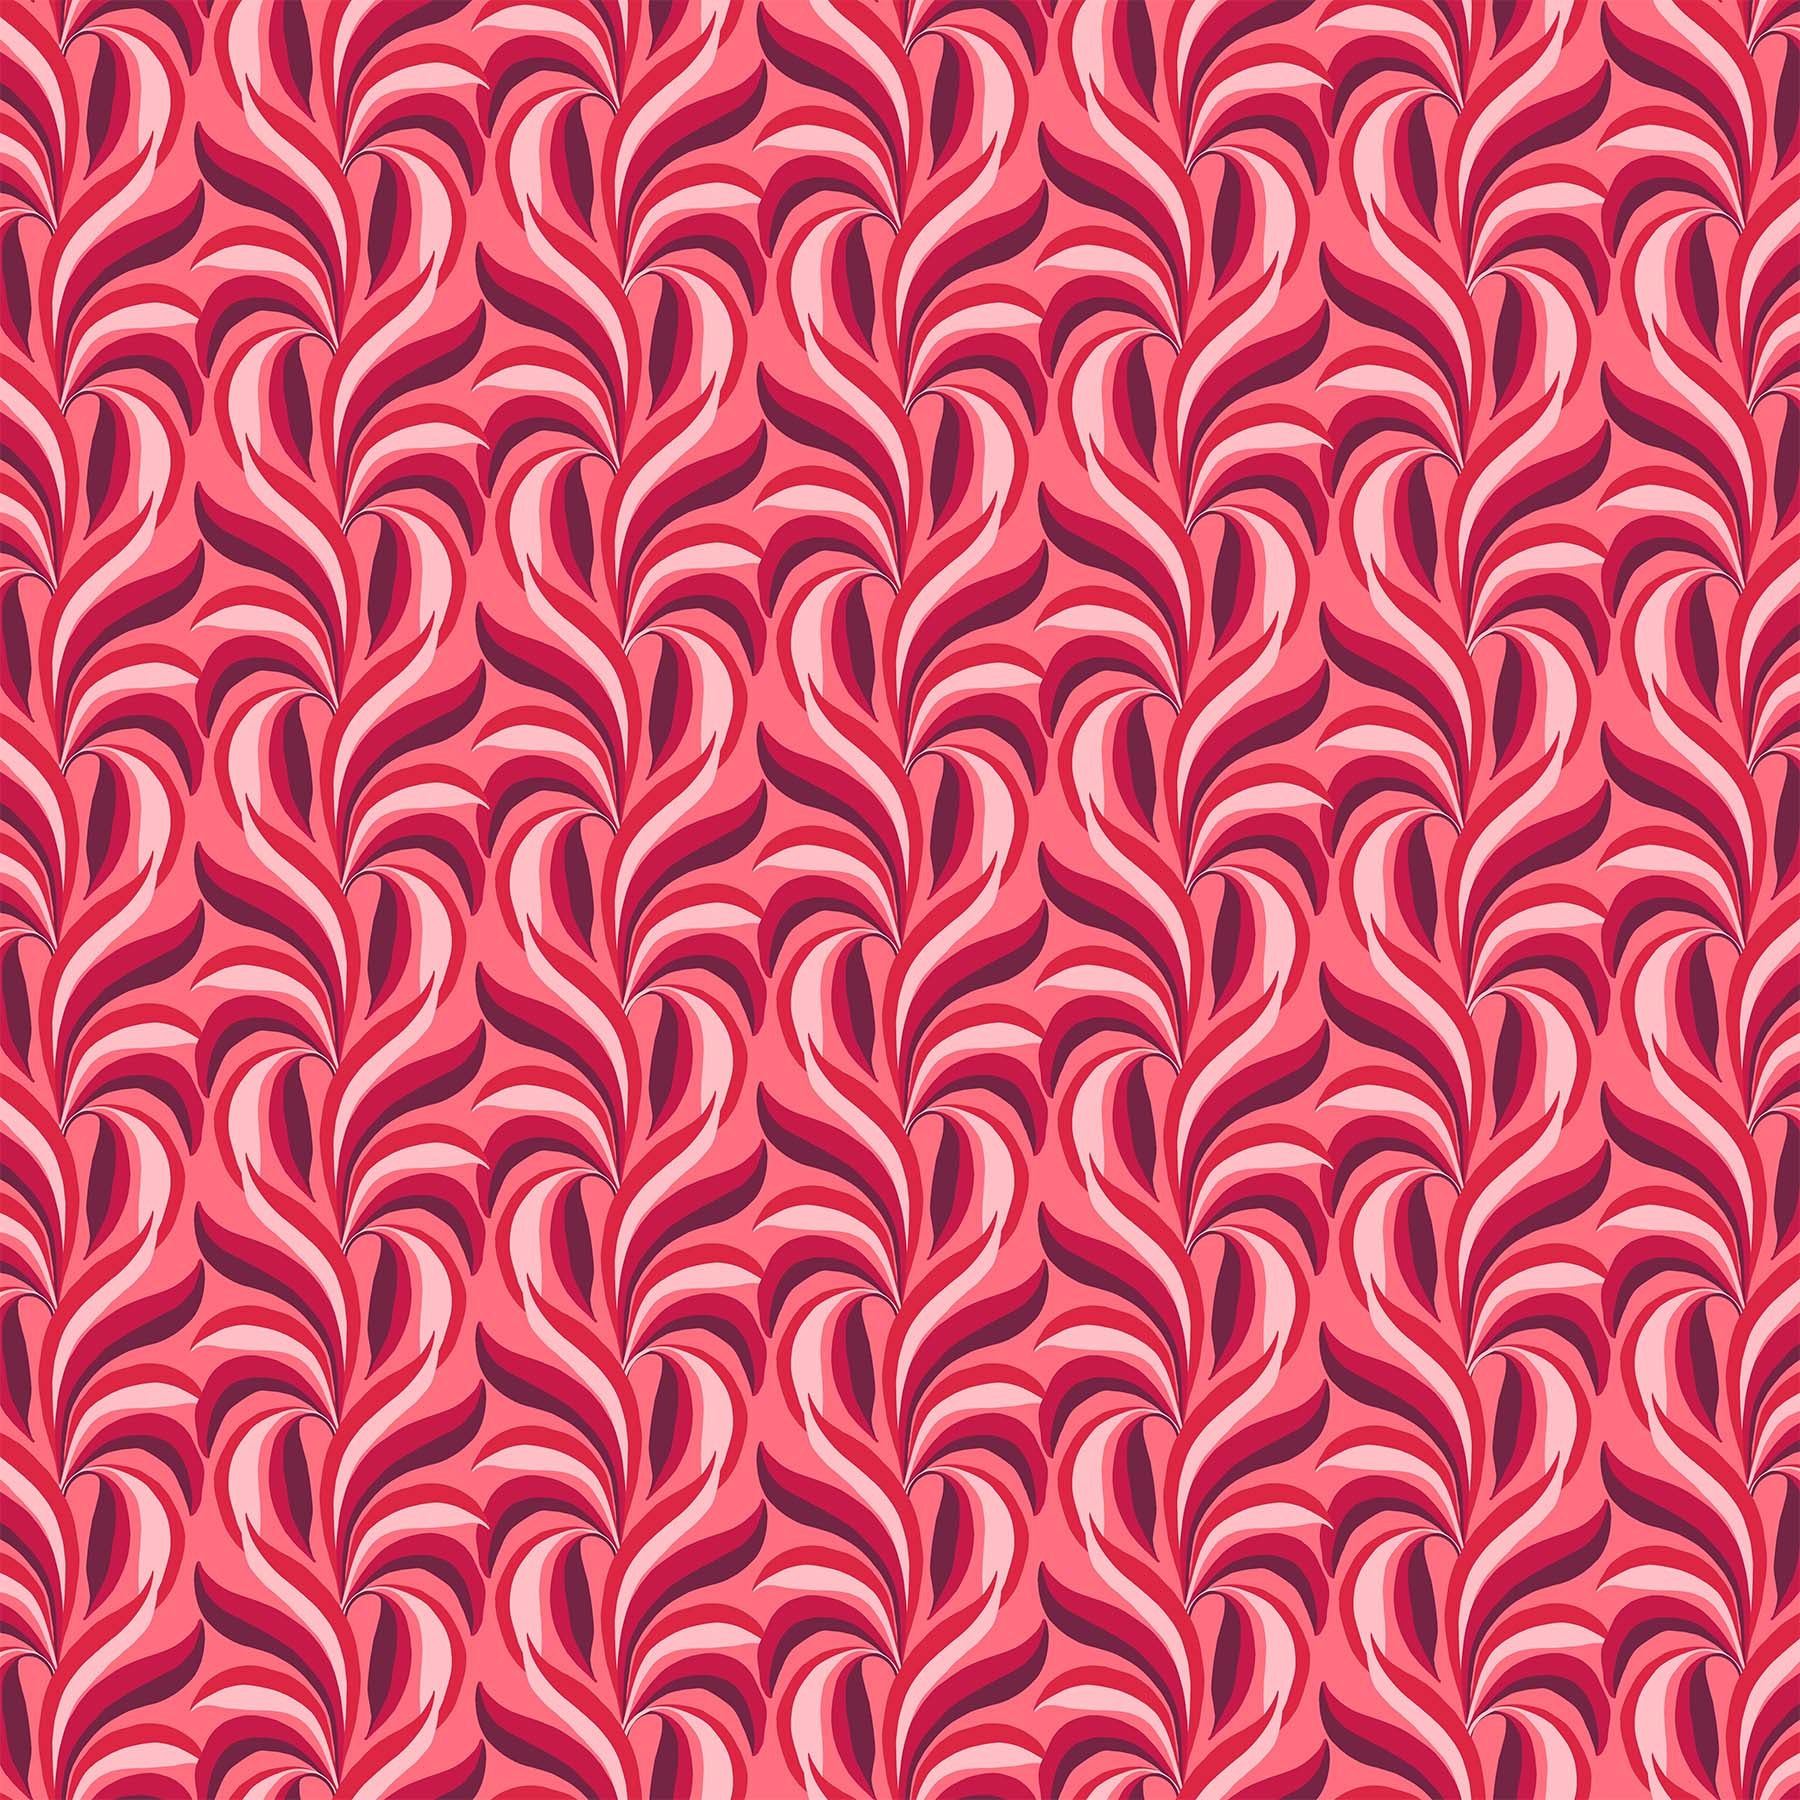 Happiness Quilt Fabric - Peace Leaves in Red/Multi - 90593-24